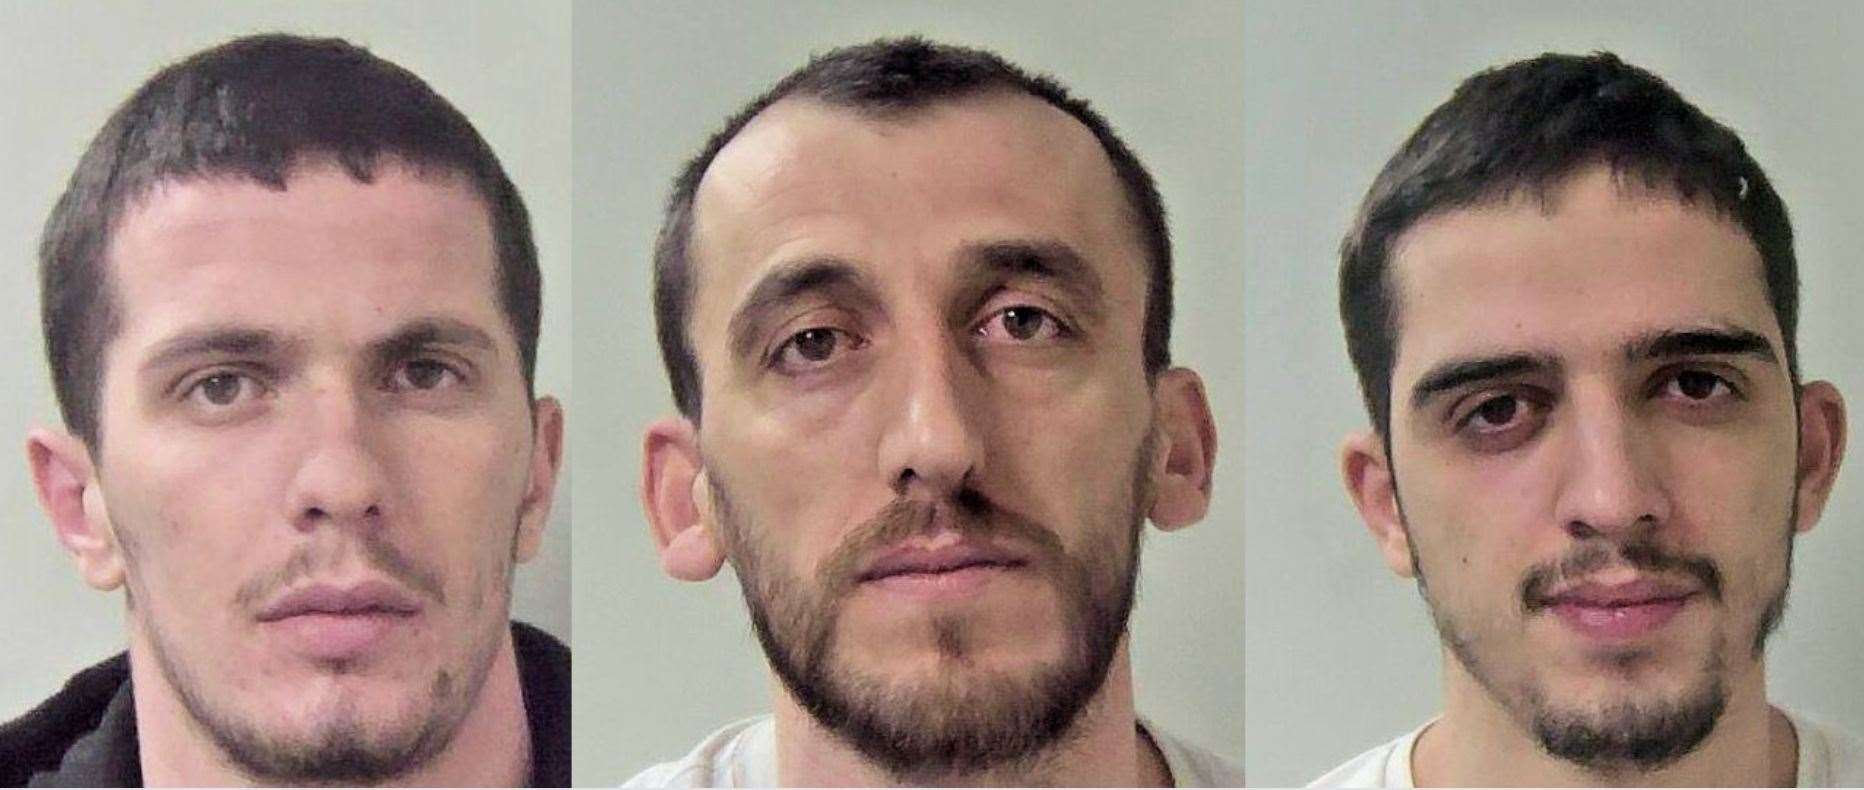 Shkelzen Vata, 21, Zylfi Hata, 35 and Fabio Maloku, 22, all of no fixed address tried to escape when police busted their cannabis factory in Ramsgate. Photo: Kent Police